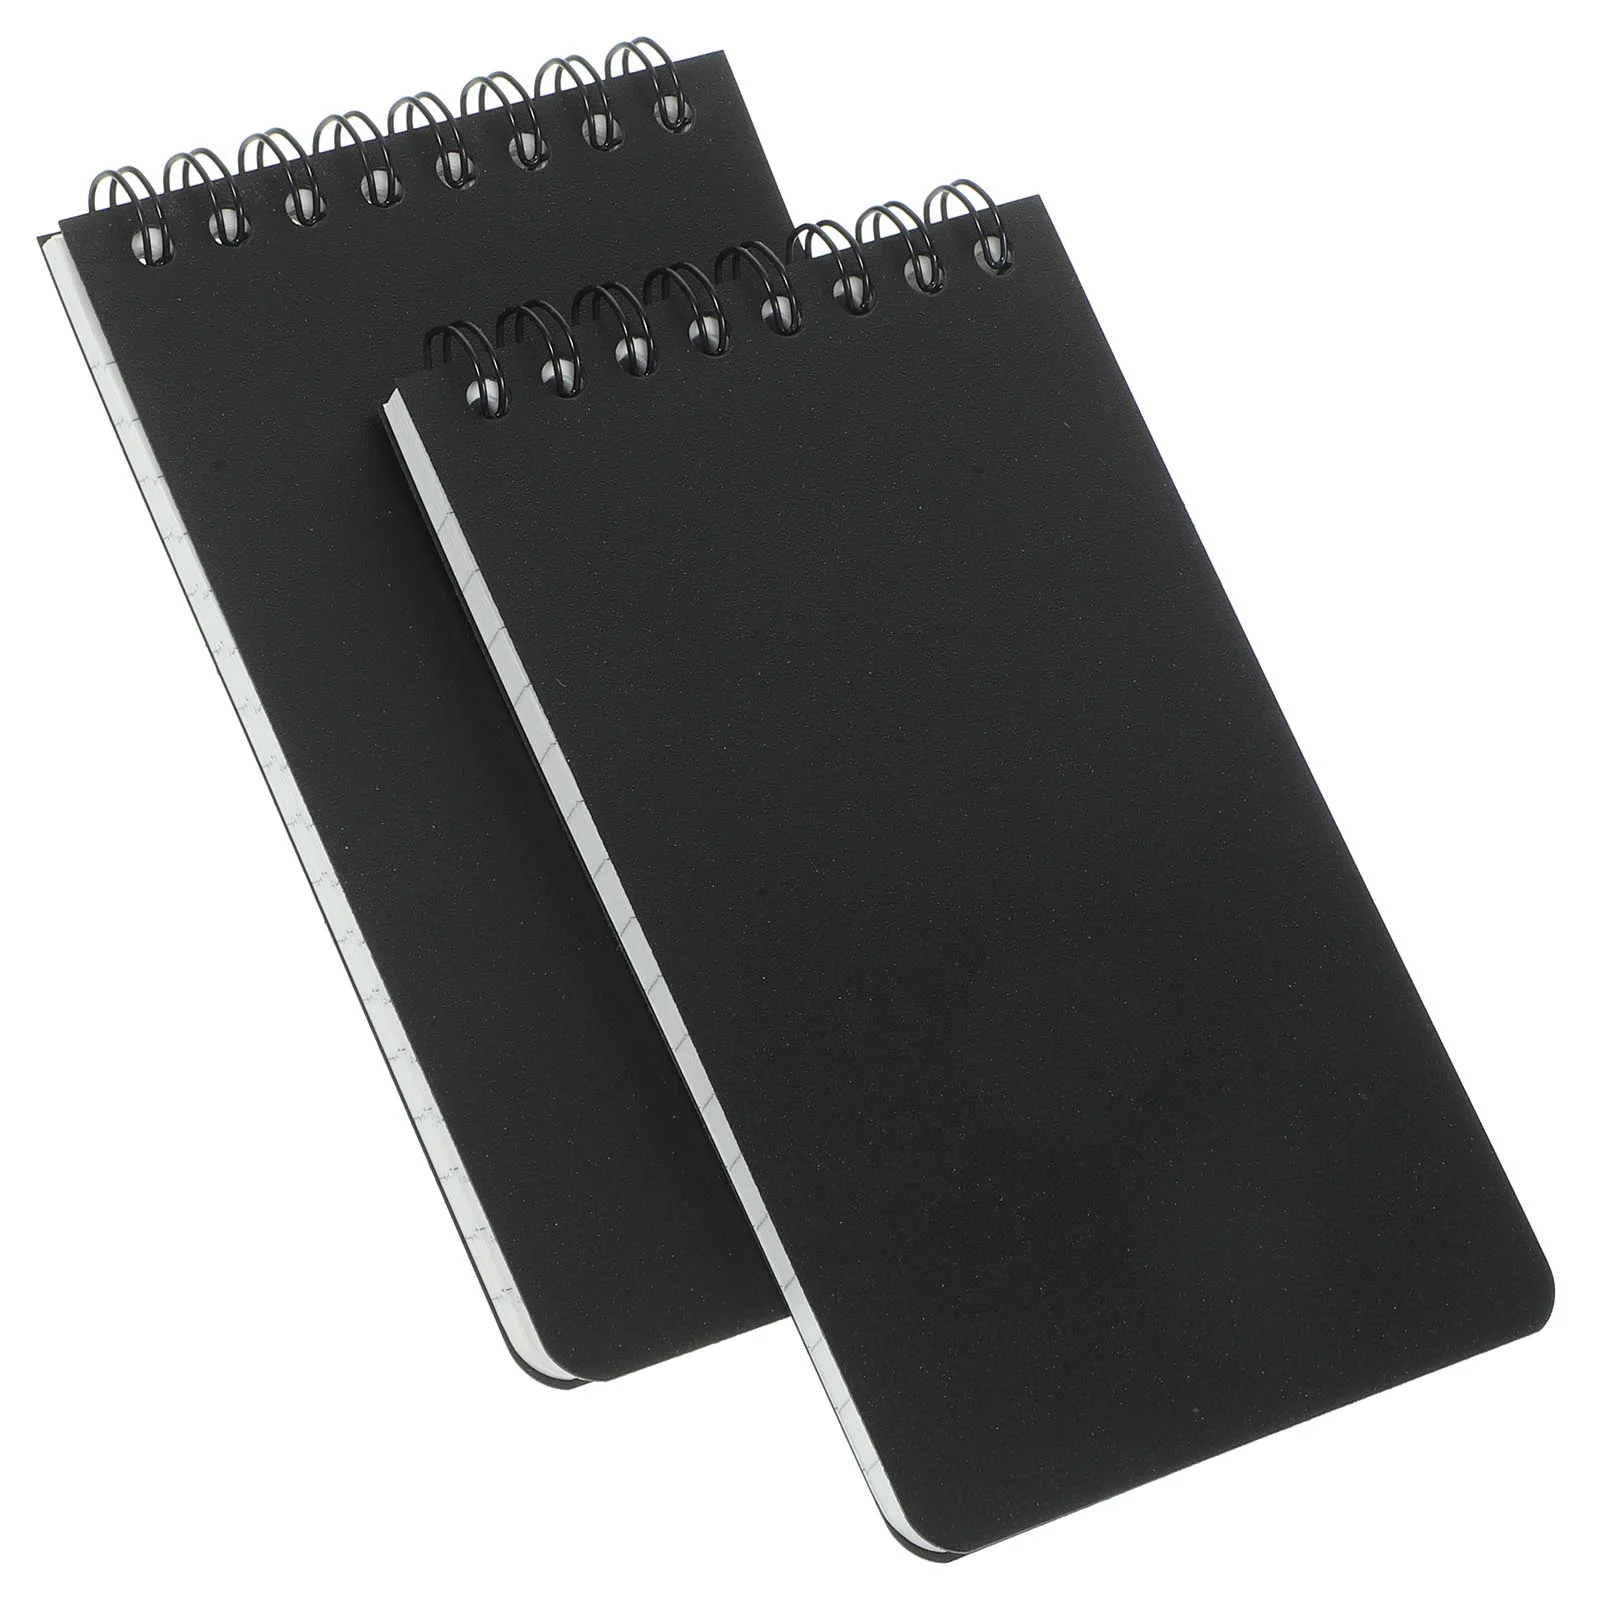 

2Pcs Small Memo Pads Spiral Binding Notepads Pocket Notebooks Small Planning Pads Notepads